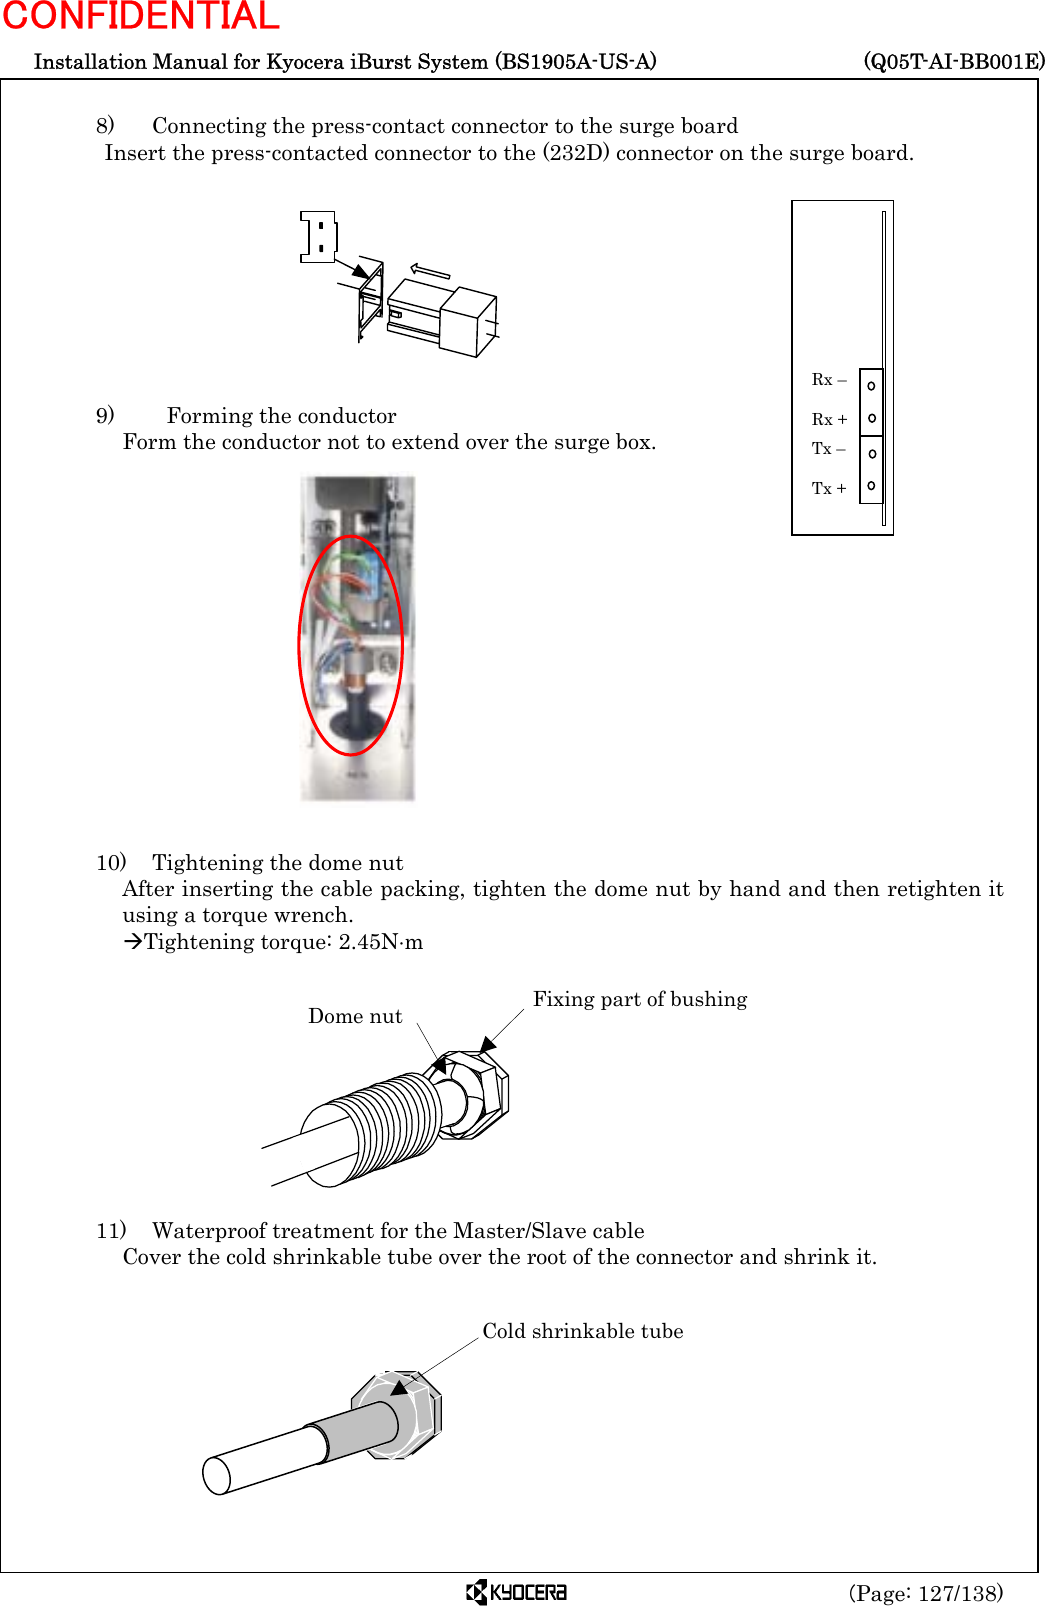  Installation Manual for Kyocera iBurst System (BS1905A-US-A)     (Q05T-AI-BB001E) (Page: 127/138) CONFIDENTIAL  8)   Connecting the press-contact connector to the surge board Insert the press-contacted connector to the (232D) connector on the surge board.          9)    Forming the conductor Form the conductor not to extend over the surge box.                10)    Tightening the dome nut After inserting the cable packing, tighten the dome nut by hand and then retighten it using a torque wrench. ÆTightening torque: 2.45N⋅m           11)  Waterproof treatment for the Master/Slave cable Cover the cold shrinkable tube over the root of the connector and shrink it.           Tx –  Tx + Rx –  Rx + Dome nut  Fixing part of bushing Cold shrinkable tube  